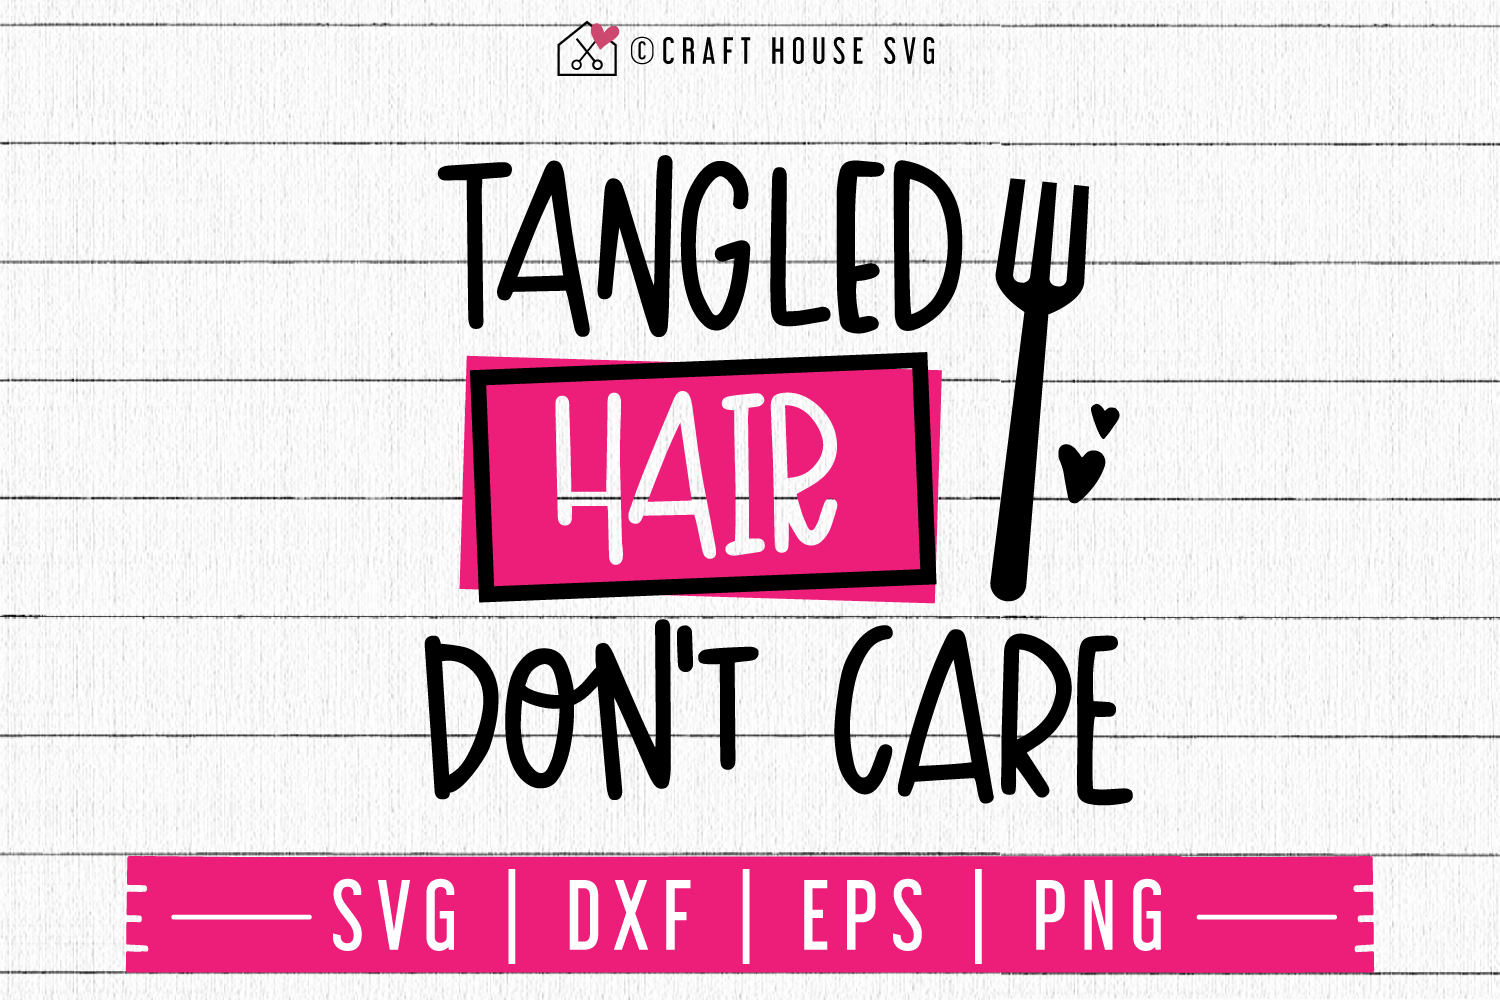 Tangled hair don't care SVG | M48F | A Summer SVG cut file Craft House SVG - SVG files for Cricut and Silhouette